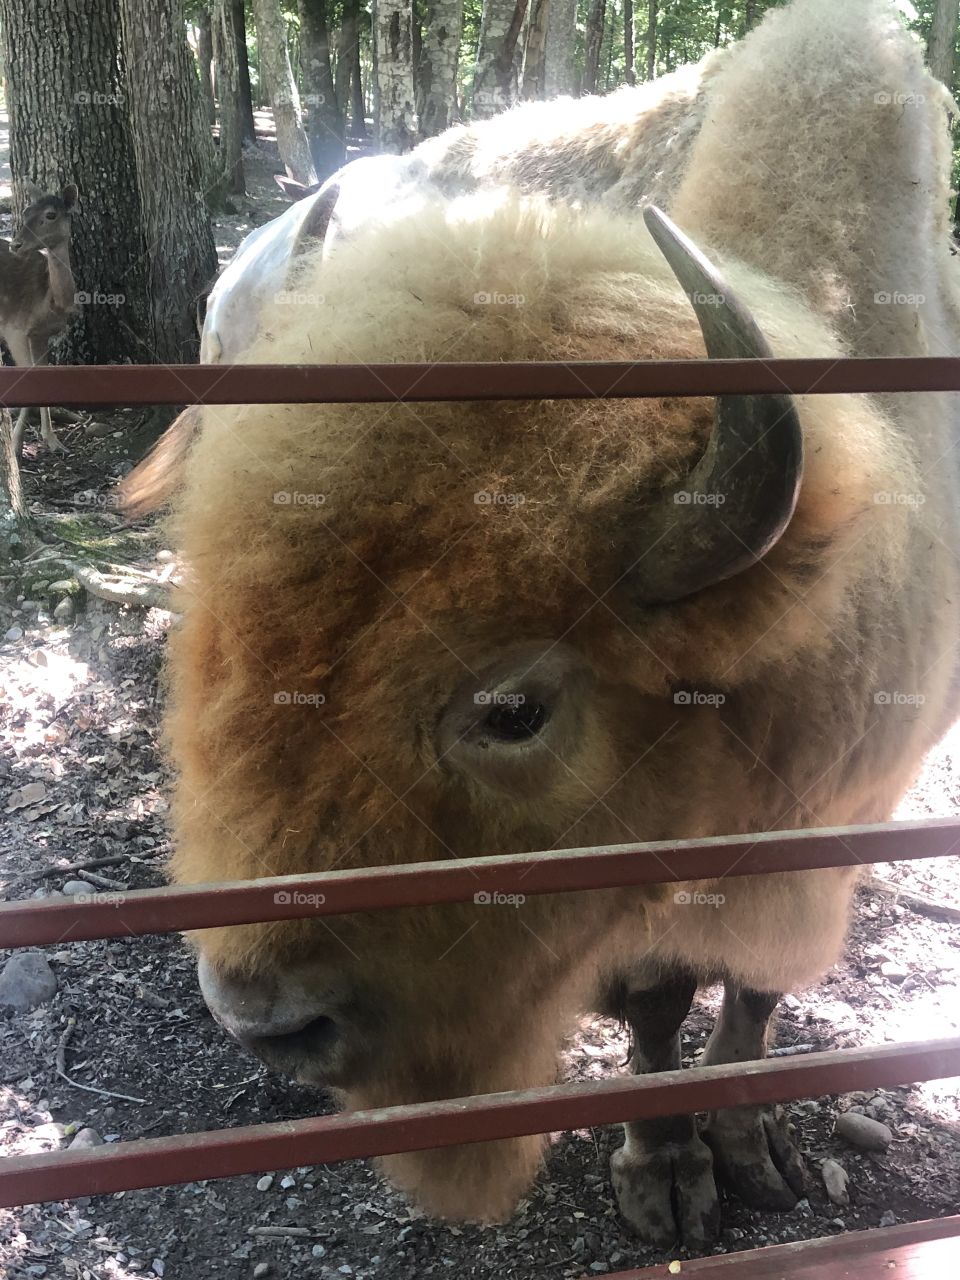 Briarwood Safari Park, Morristown TN. This is “Custer”. Their bull buffalo. He was so beautiful and so gentle. 